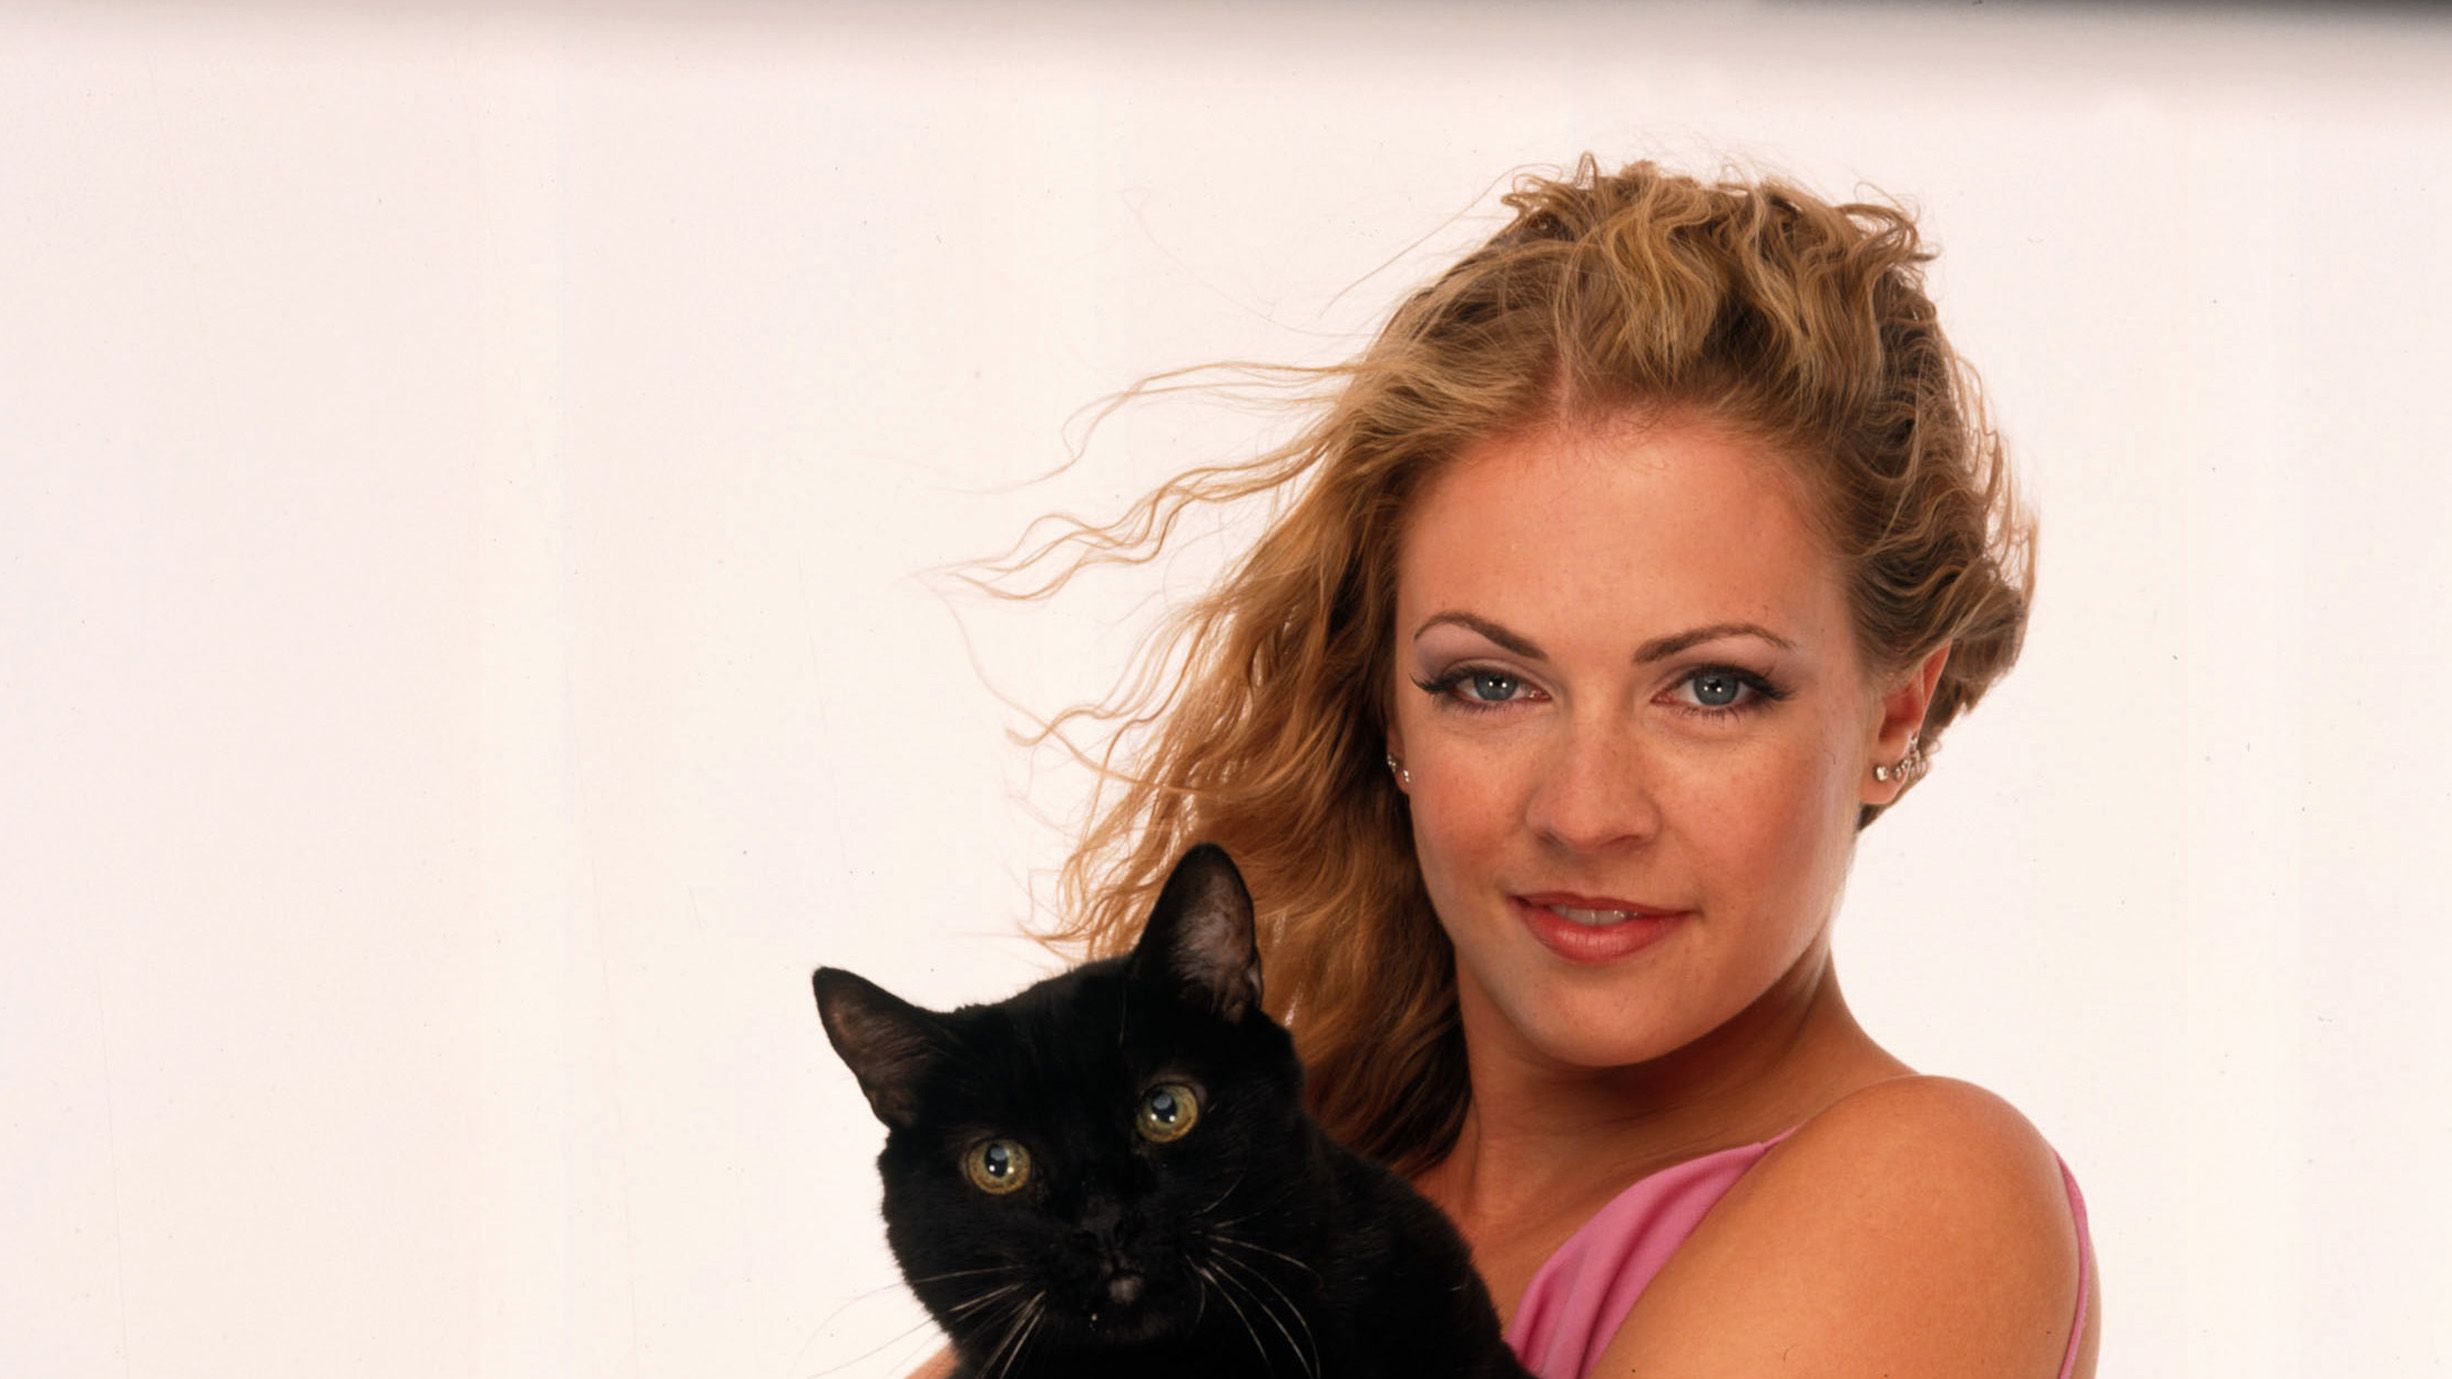 2452px x 1379px - A 'Maxim' Cover Almost Got Melissa Joan Hart Fired from 'Sabrina'